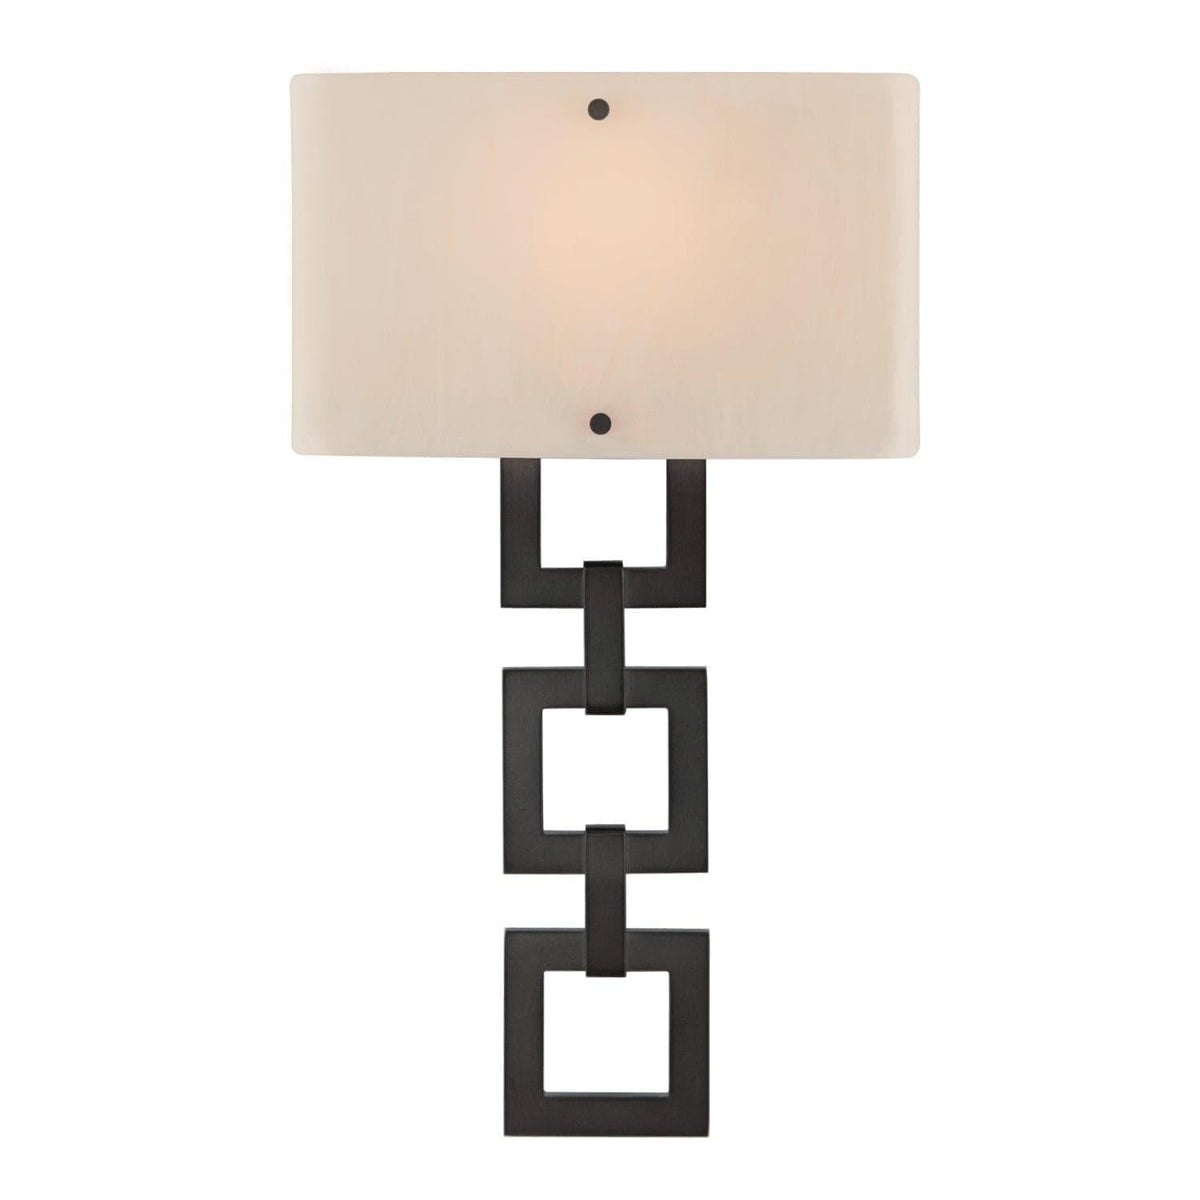 Hammerton Studio - Carlyle Square Link Cover Sconce - CSB0033-0B-GM-IW-E2 | Montreal Lighting & Hardware